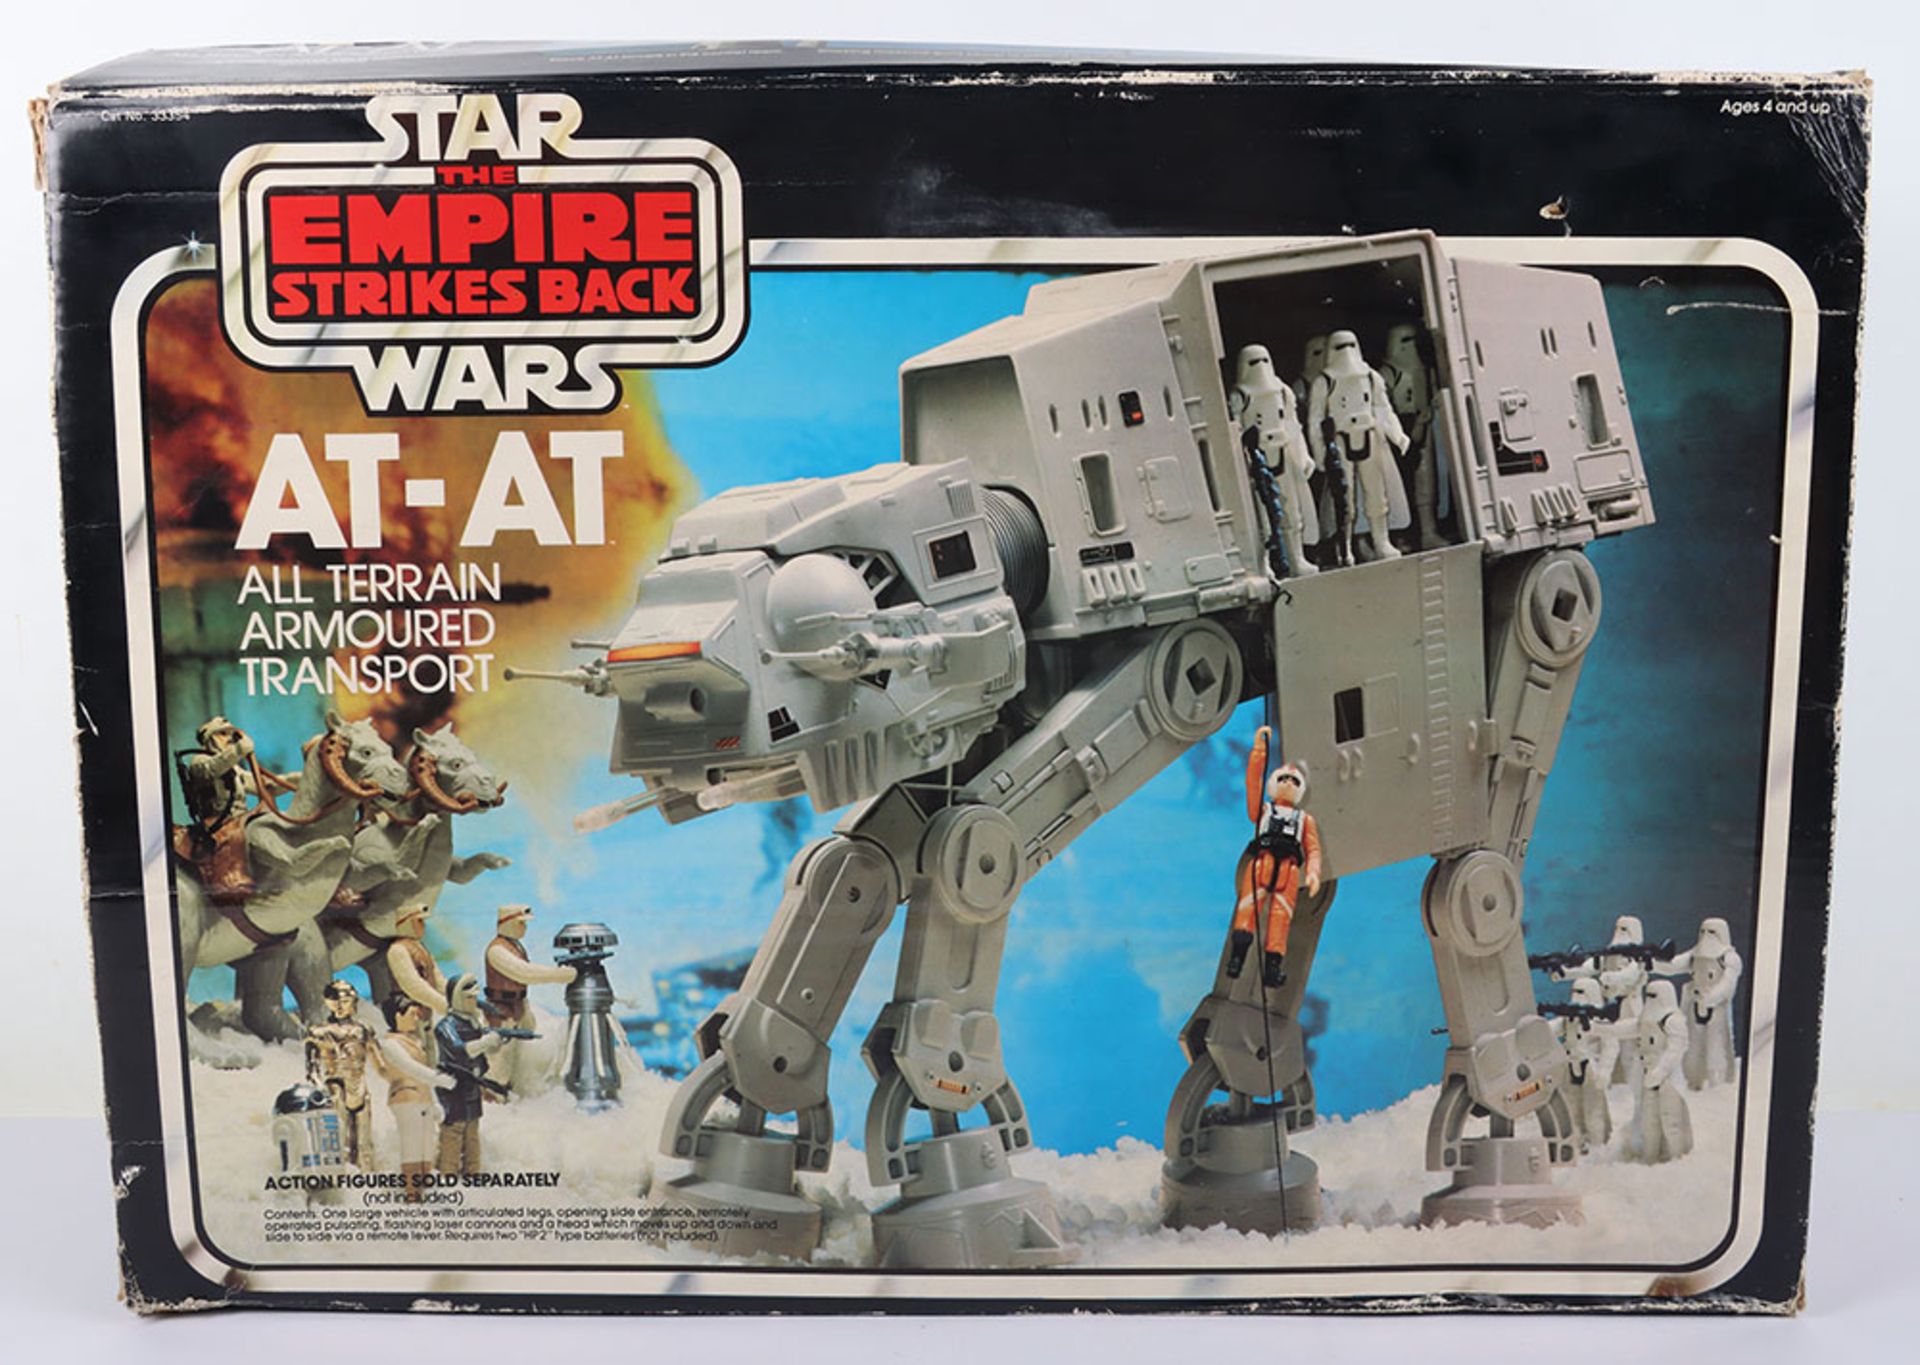 Palitoy Vintage Boxed Star Wars ‘The Empire Strikes Back’ AT-AT All Terrain Armoured Transport - Image 5 of 10